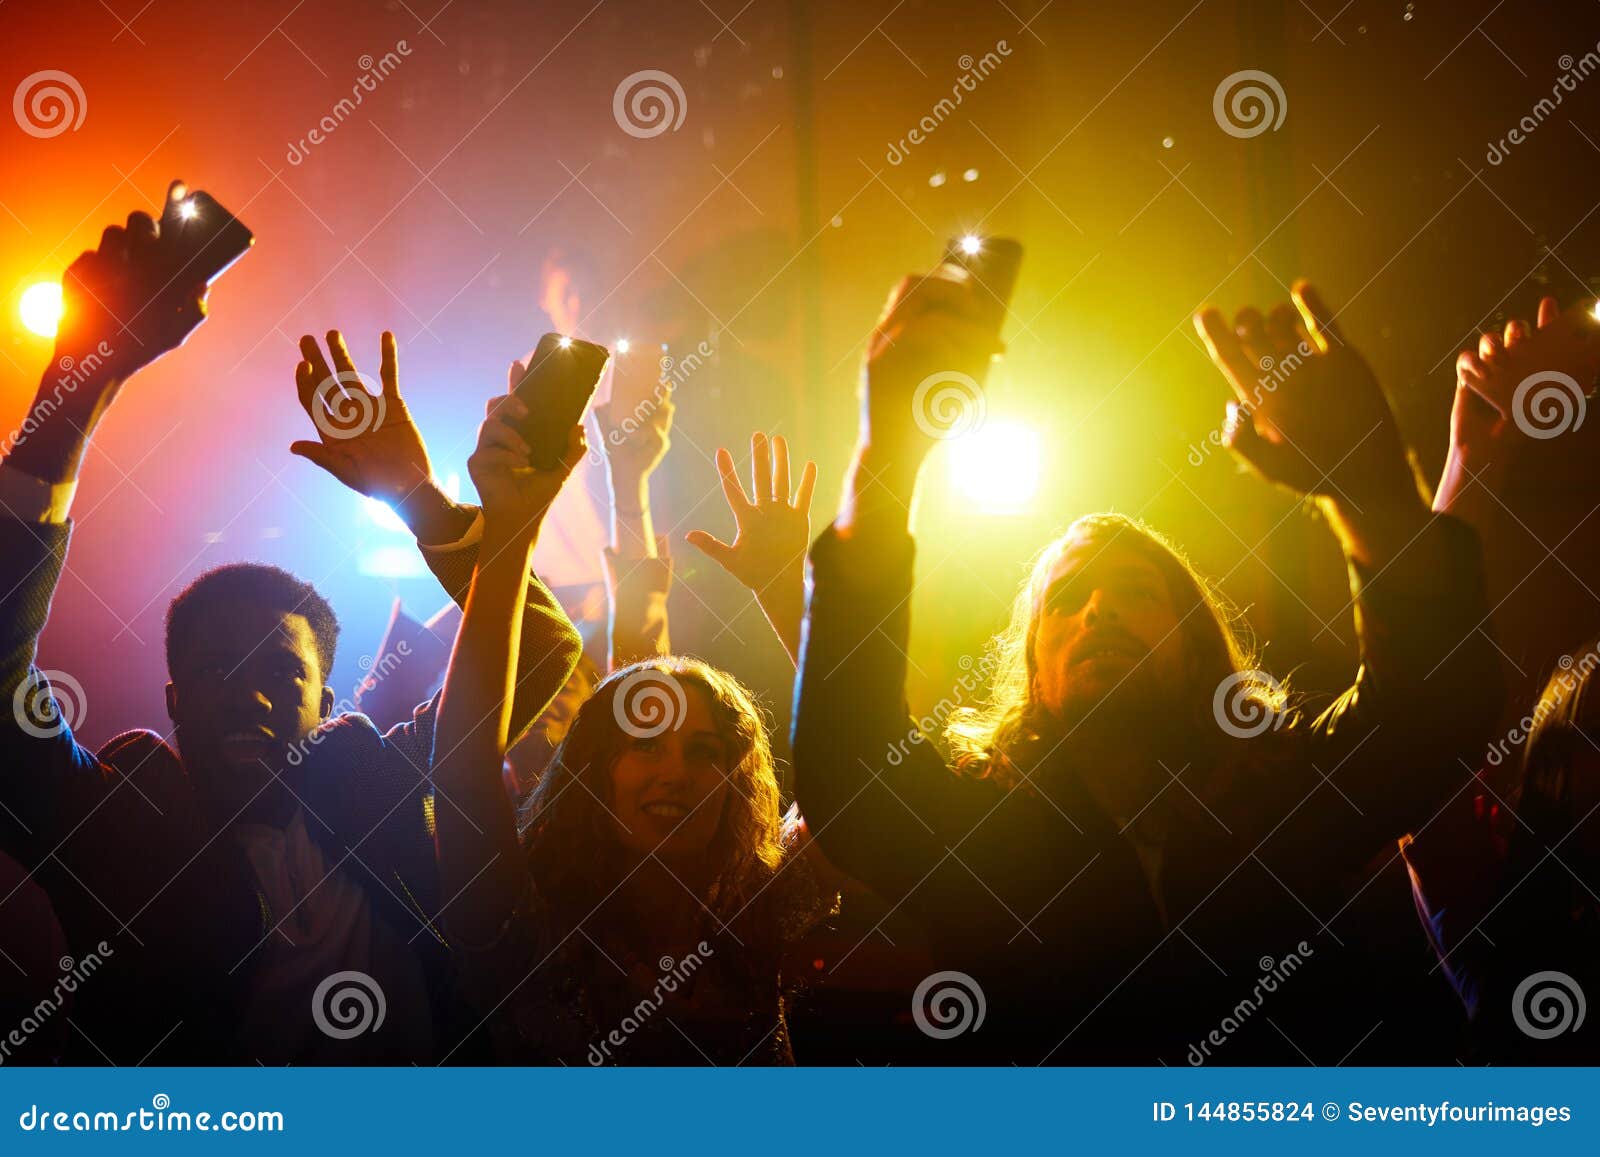 Group of Fans Enjoying Performance of Musician Stock Photo - Image of ...